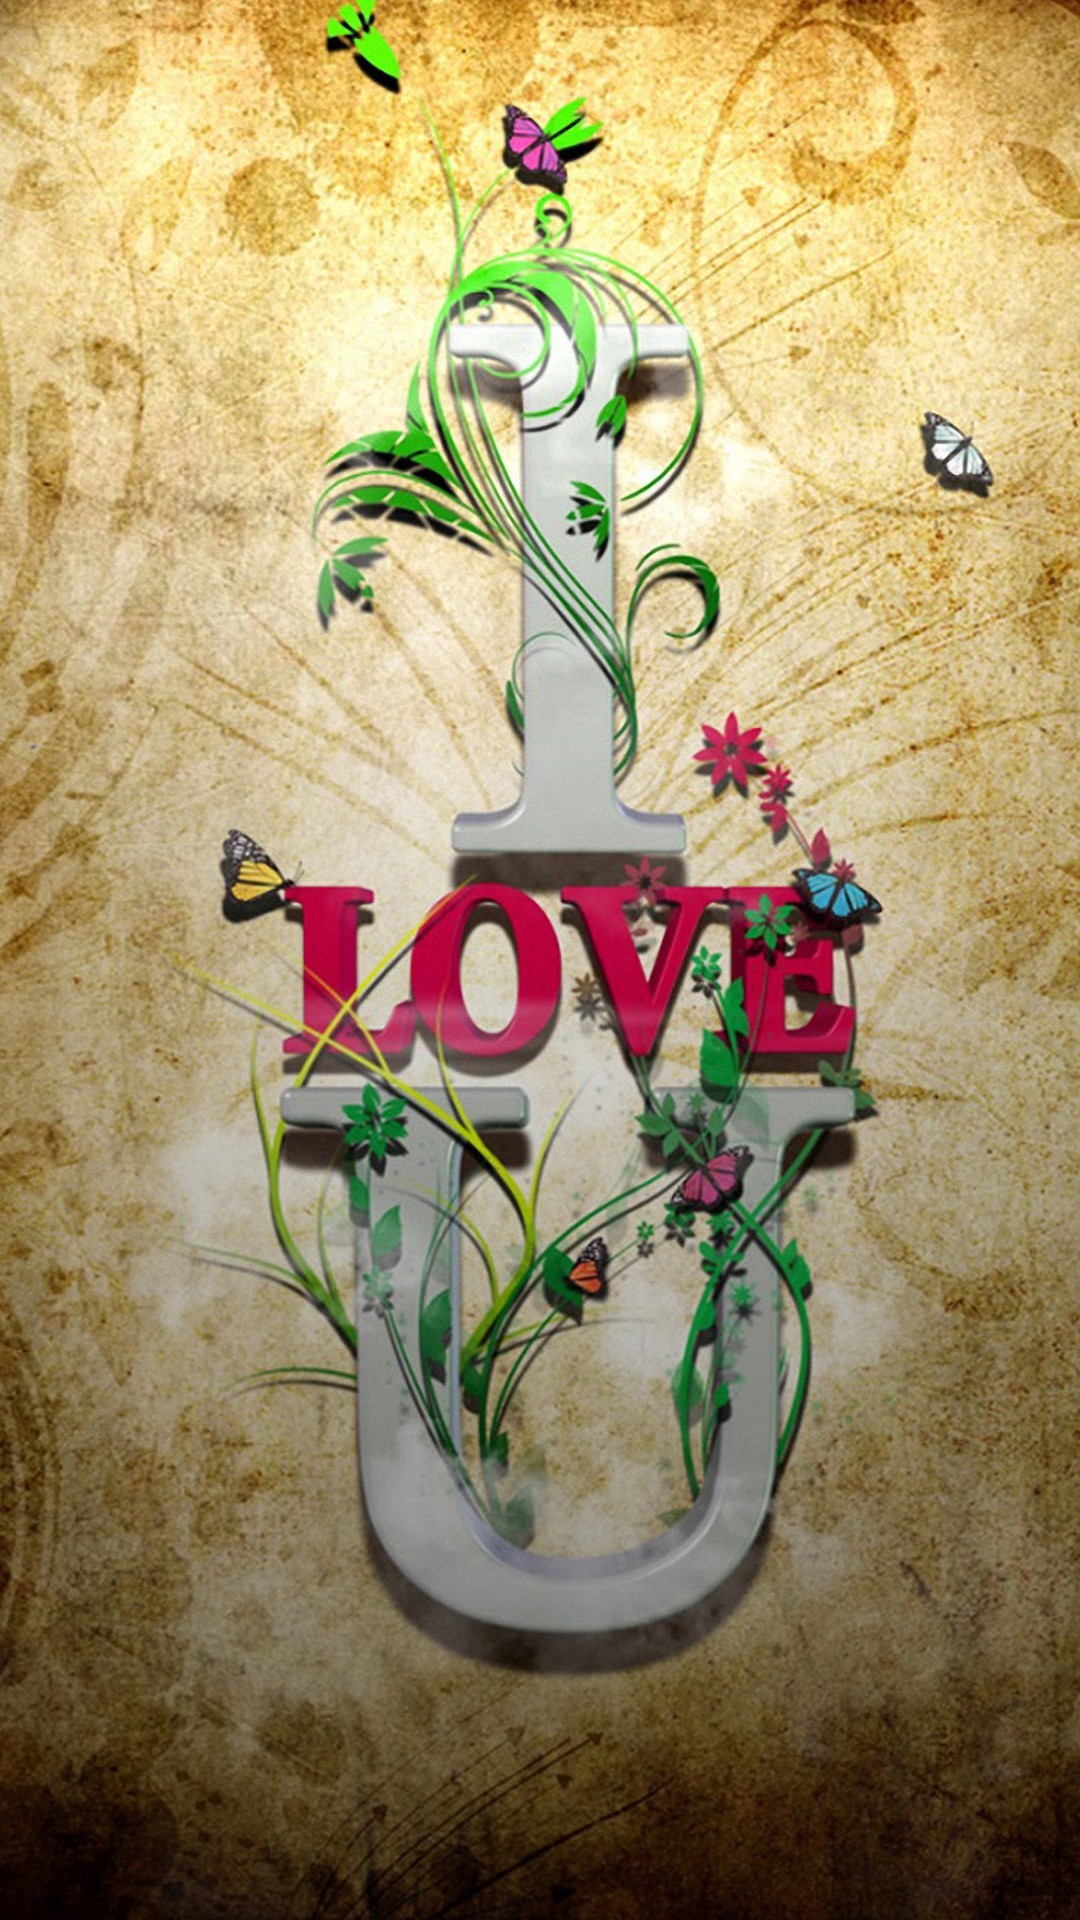 1080x1920 Samsung Htc Lg Mobile Hd Wallpapers Hd Wallpapers Of Love For